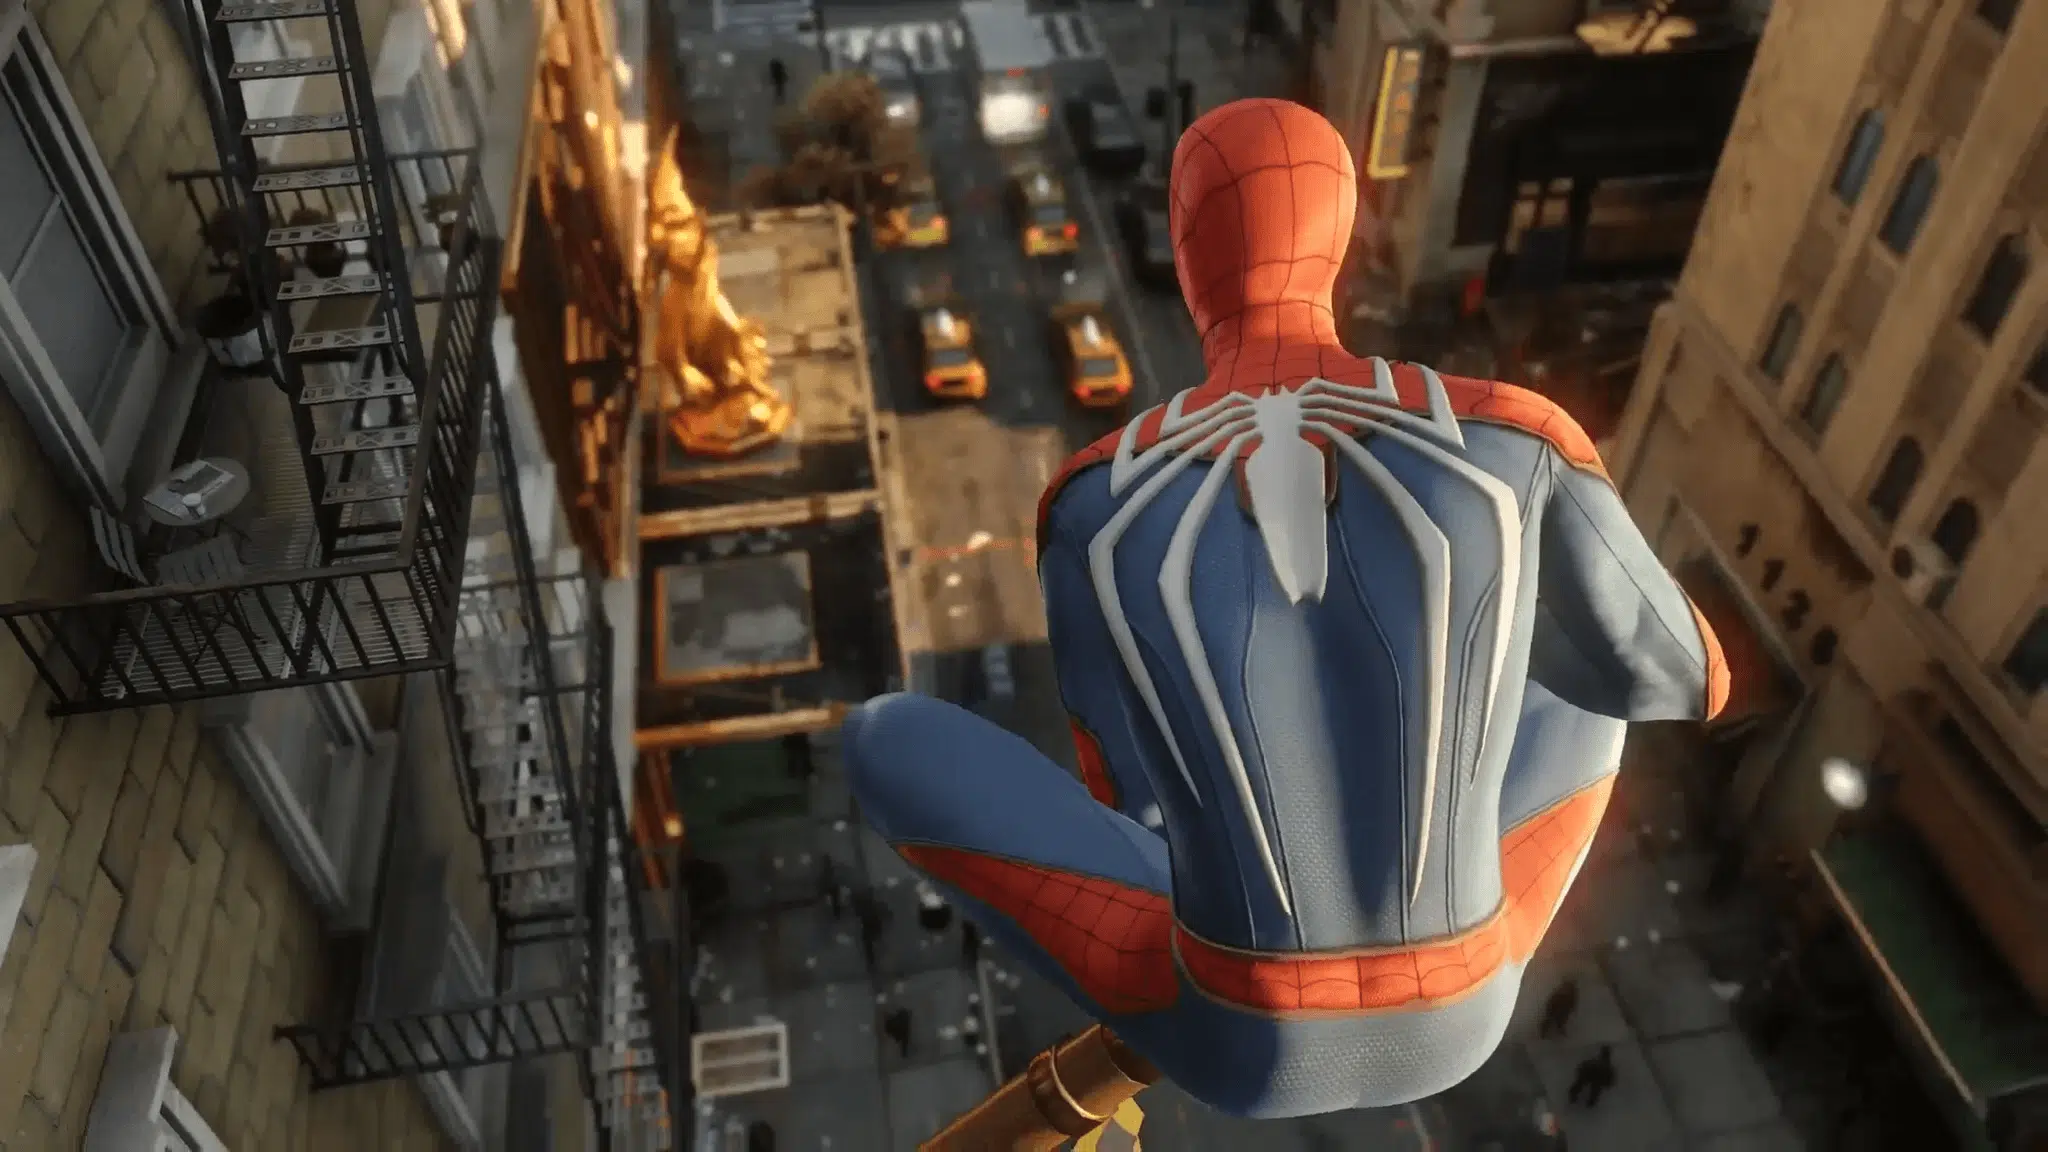 Spider-Man's screenshot giving us a glimpse of its stunning visuals